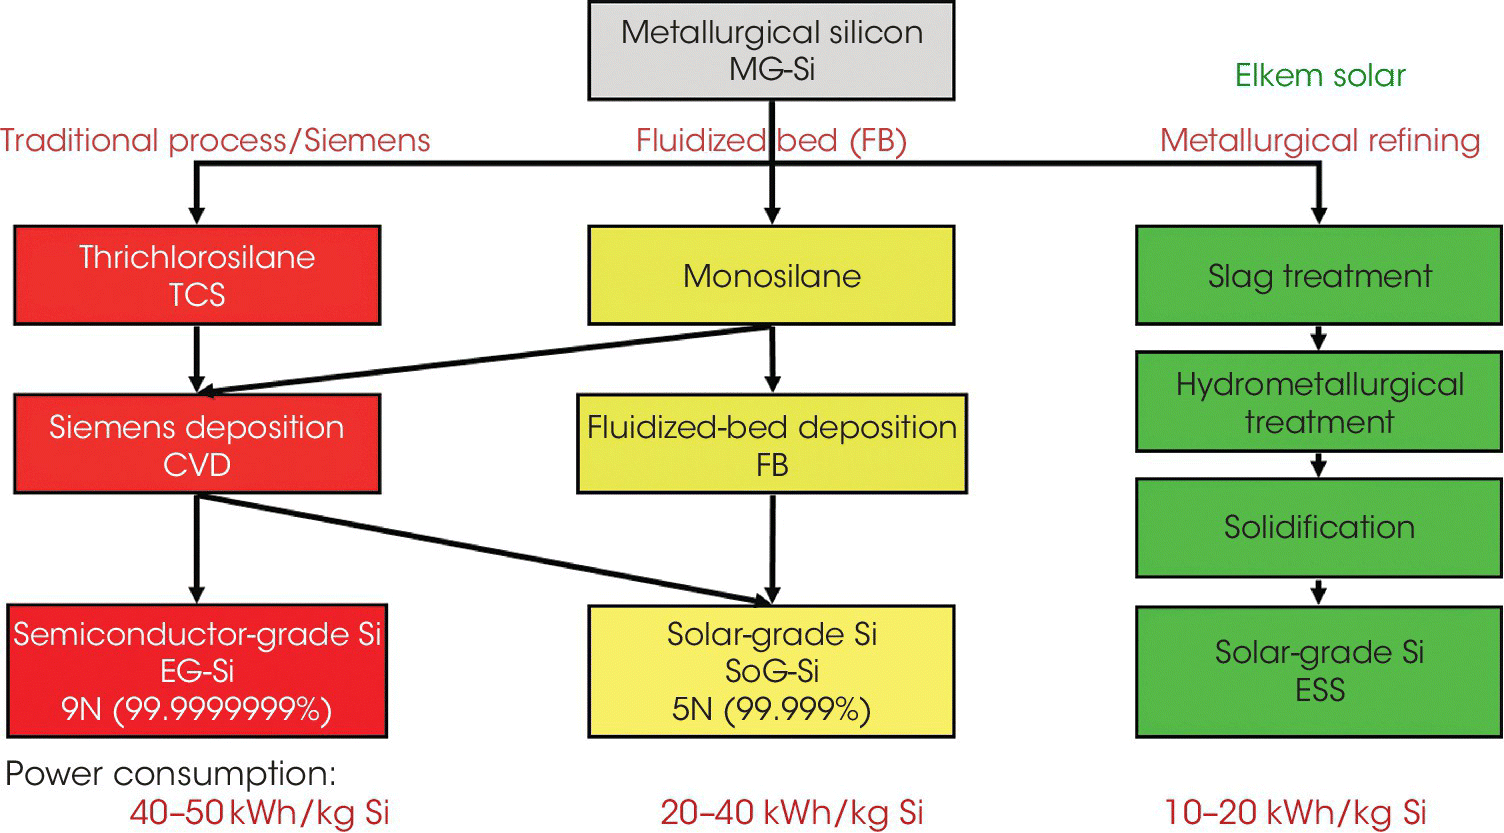 Diagram illustrating polysilicon production processes for the PV industry, displaying boxes labeled metallurgical silicon MG-Si branches to thrichlorosilane TCS, monosilane, and slag treatment.